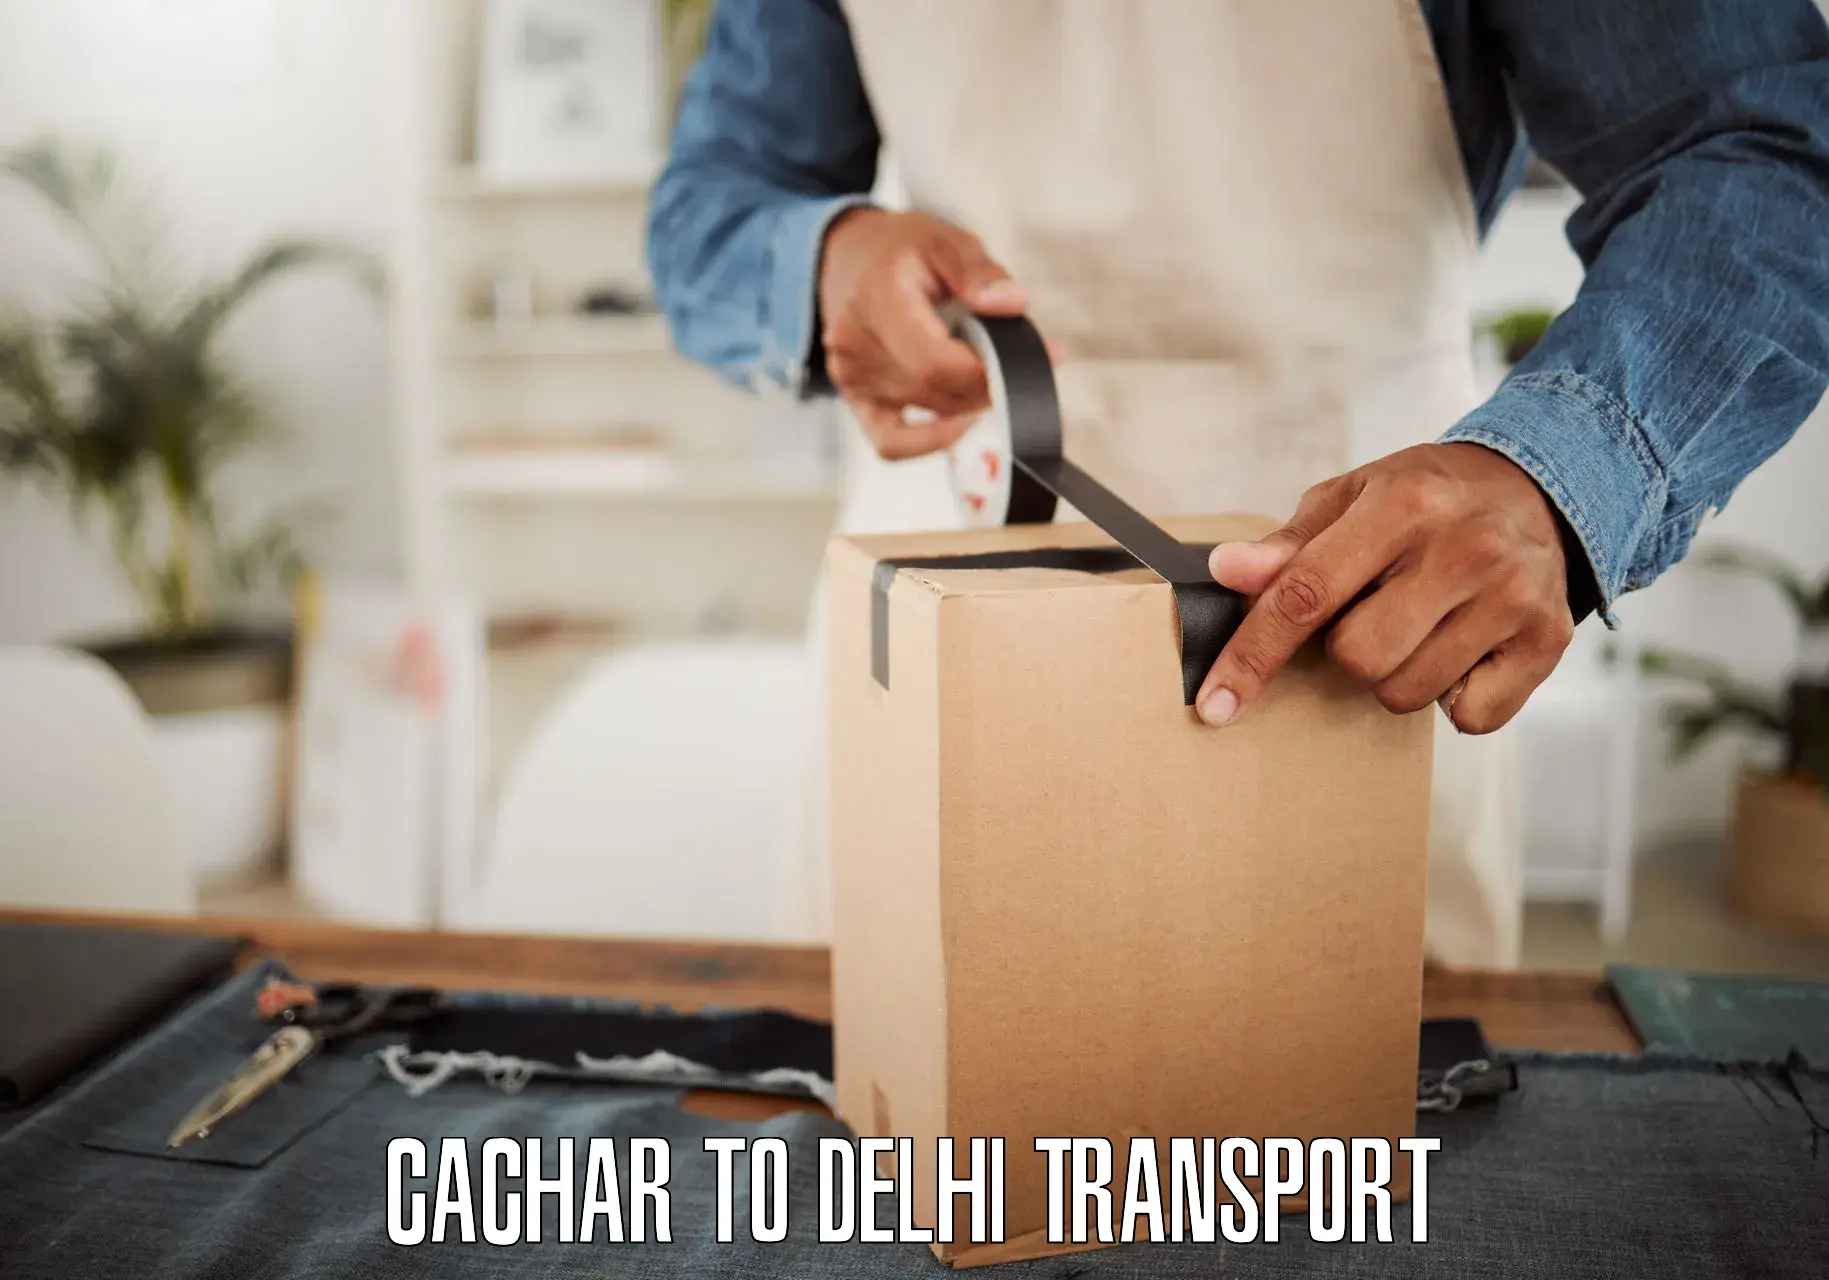 Two wheeler parcel service Cachar to Lodhi Road